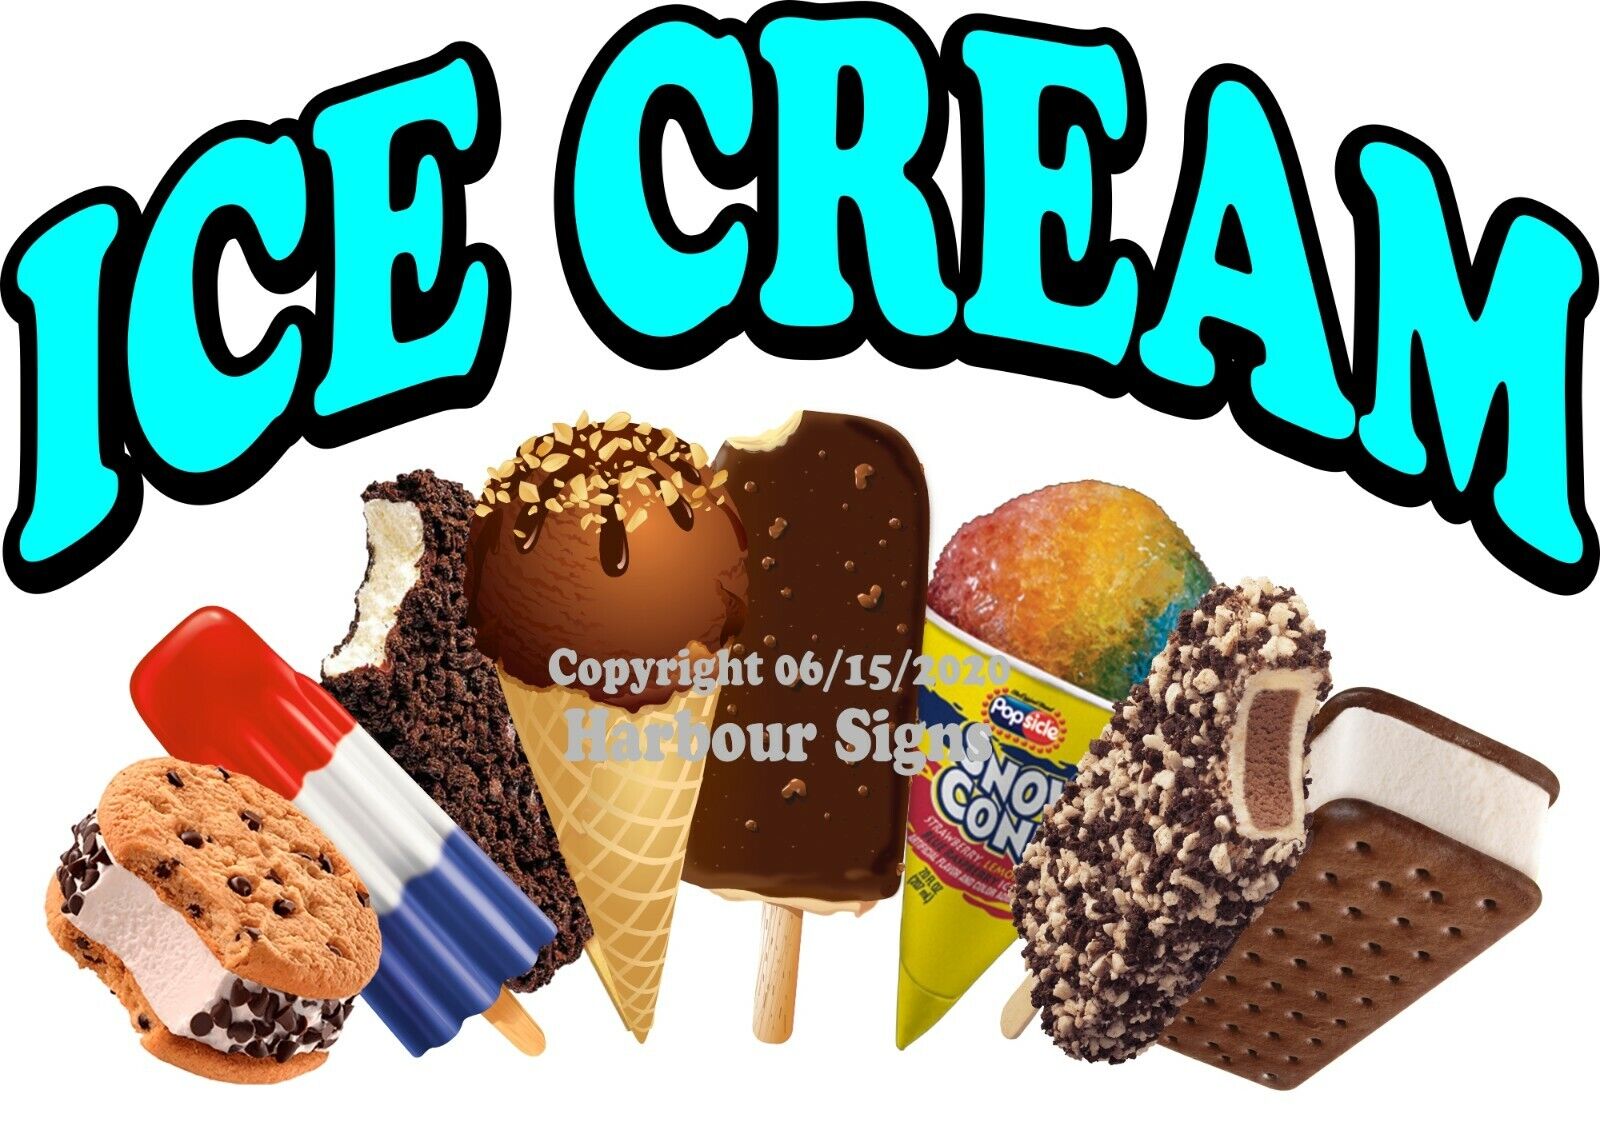 Ice Cream DECAL Food Truck Concession Vinyl Sticker (Choose Your Size)